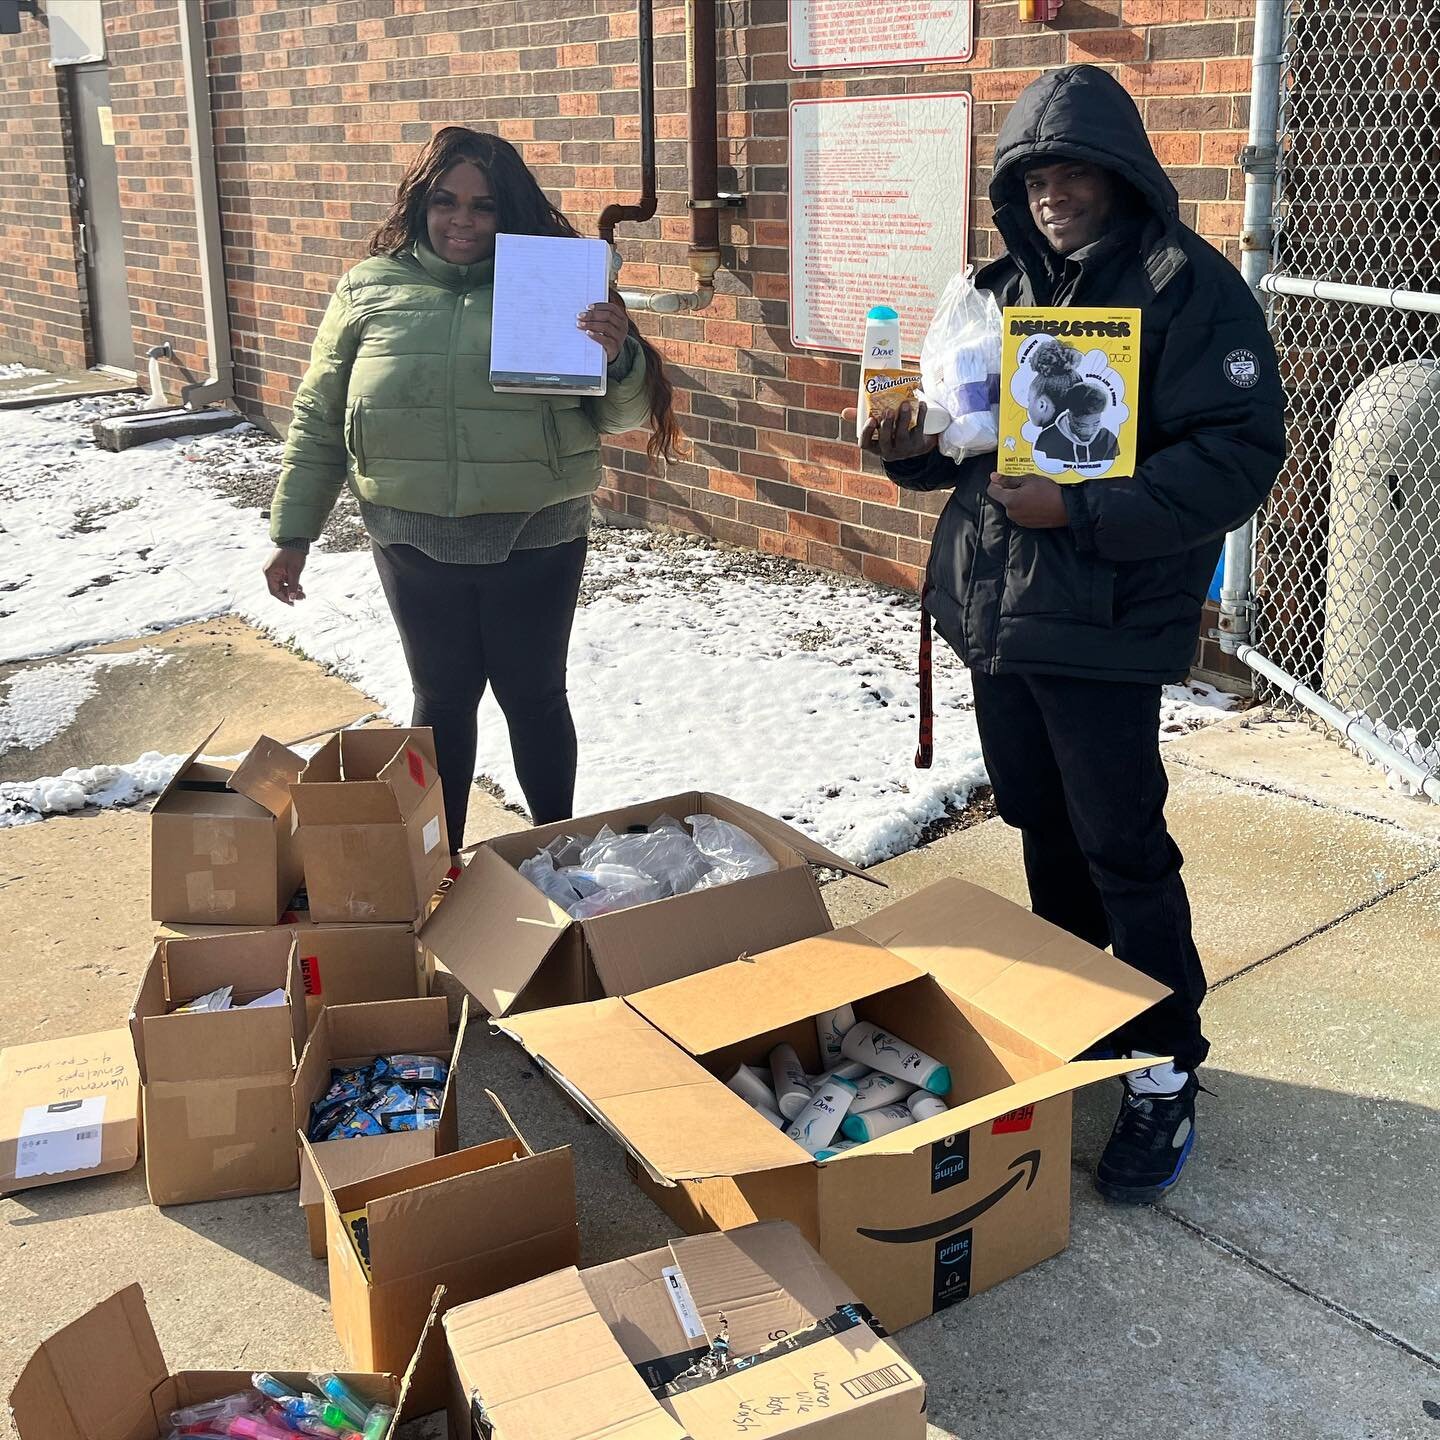 Thanks to generous support, we were able to provide holiday care packages to youth in all five youth prisons! With high commissary prices and limits on how much they can purchase, youth are often left without enough hygiene products, clothing items, 